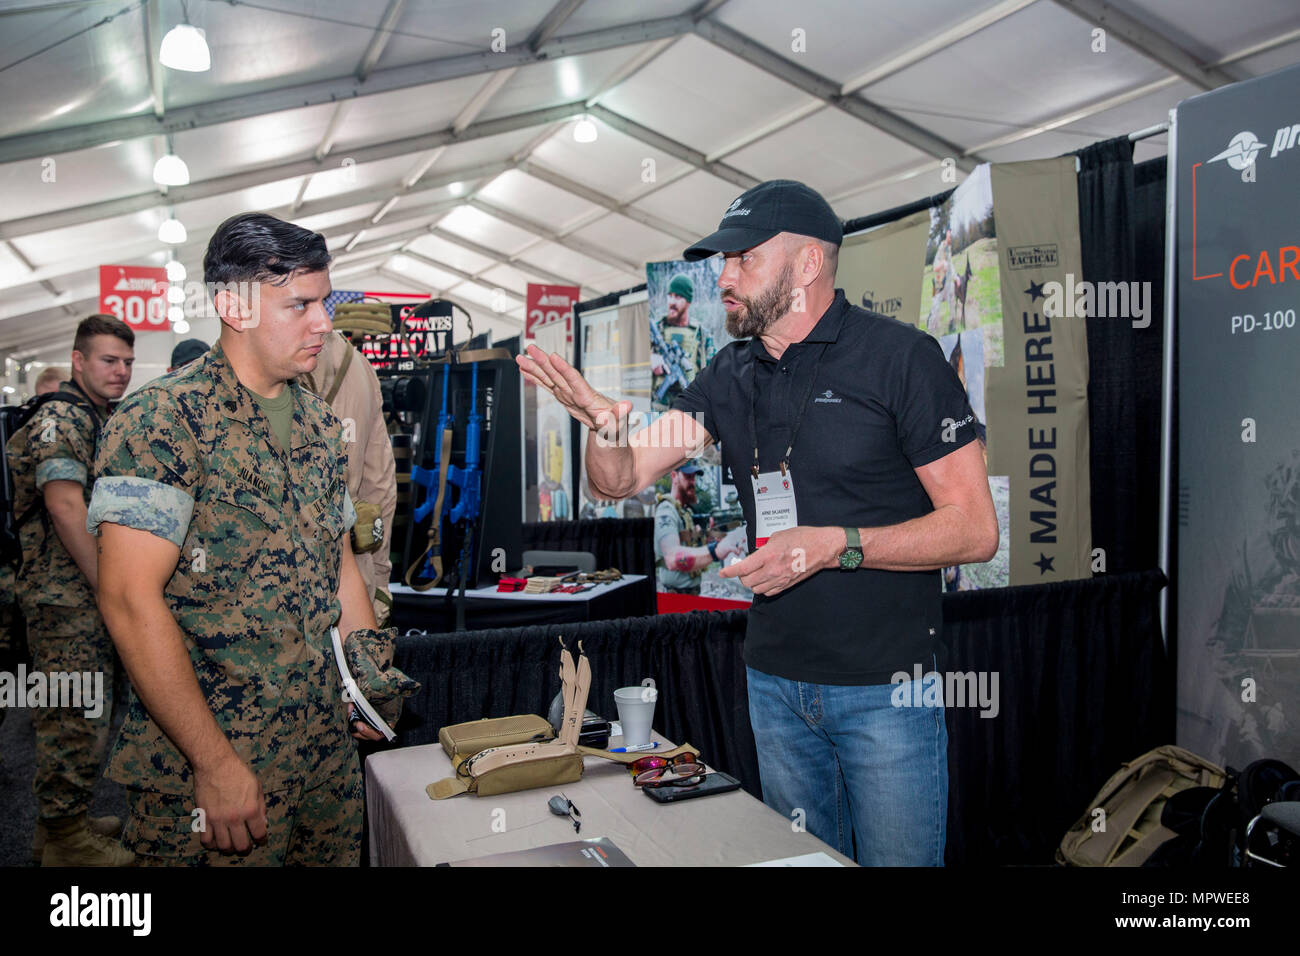 Arne Skjaerpe, right, field marketing director, Proxdynamics, speaks about the versatility of the company’s products to Marines during the Marine South Military Exposition, Goettege Field House, Camp Lejeune N.C., April 13, 2017. The Marine South Exposition is sponsored by the Marine Corps League and is a forum for defense contractors to display, inform, and promote the latest in defense equipment and technology. (U.S. Marine Corps photo by Lance Cpl. Ashley D. Gomez) Stock Photo